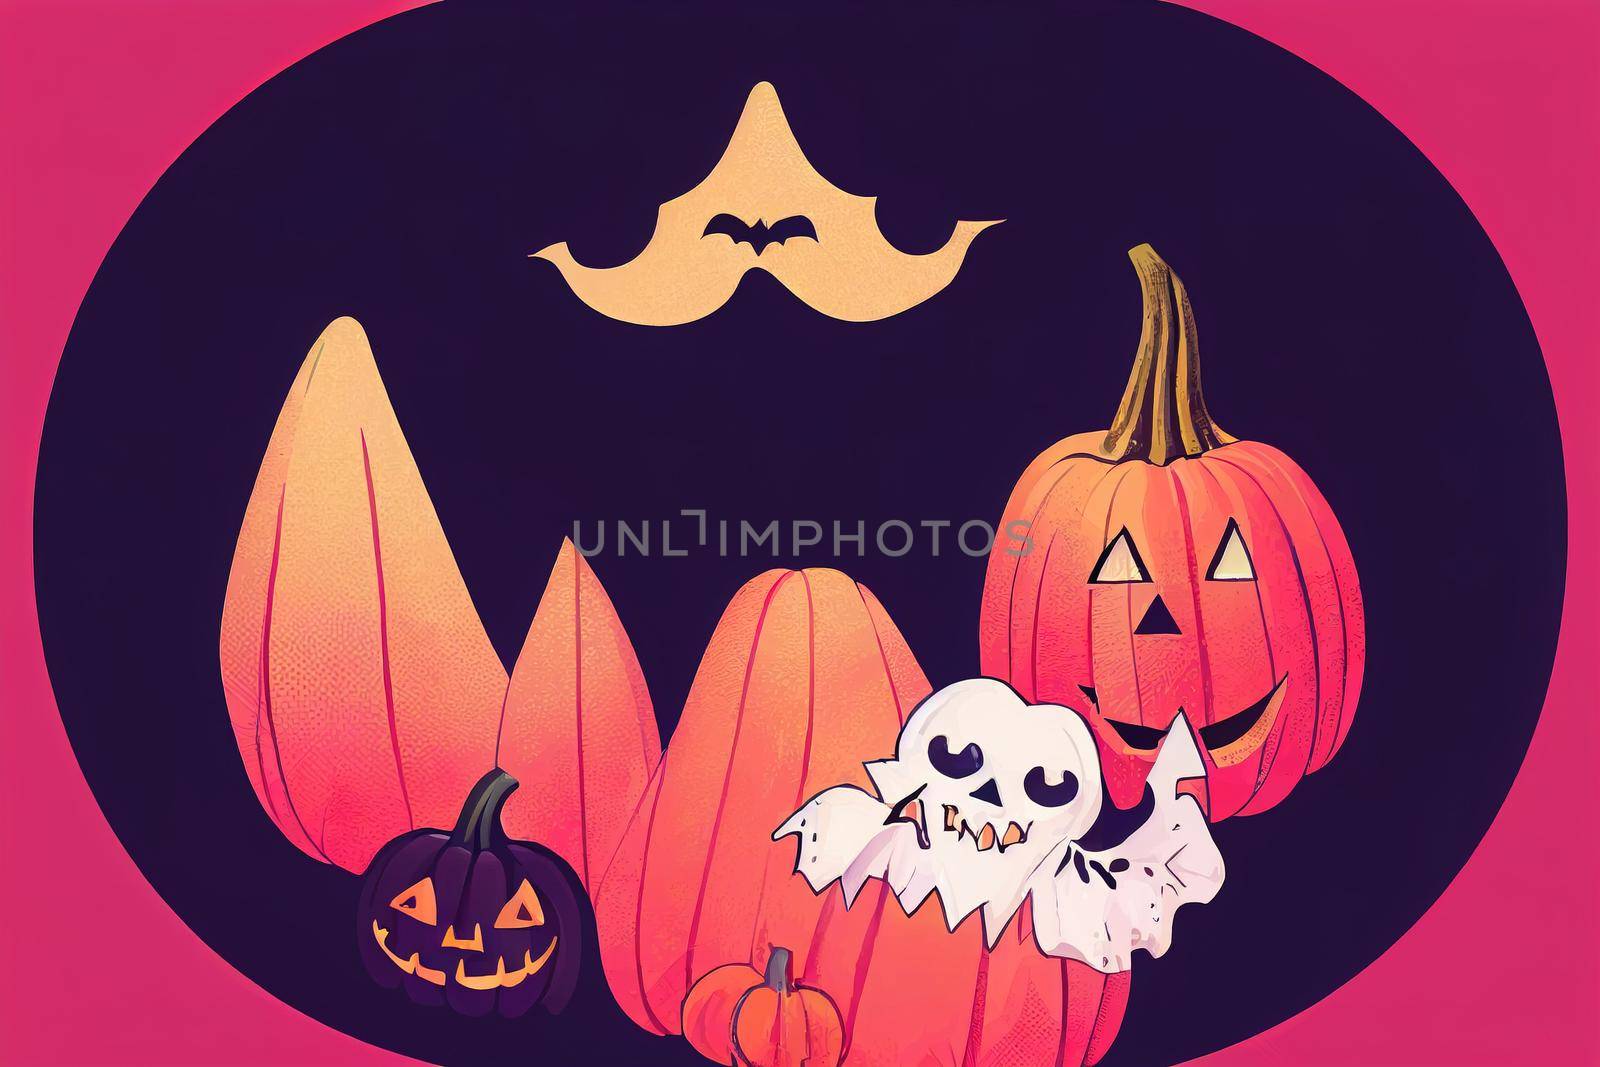 Cute Halloween Illustration with Pumpkin Surrounded by Ghosts and Bats by 2ragon